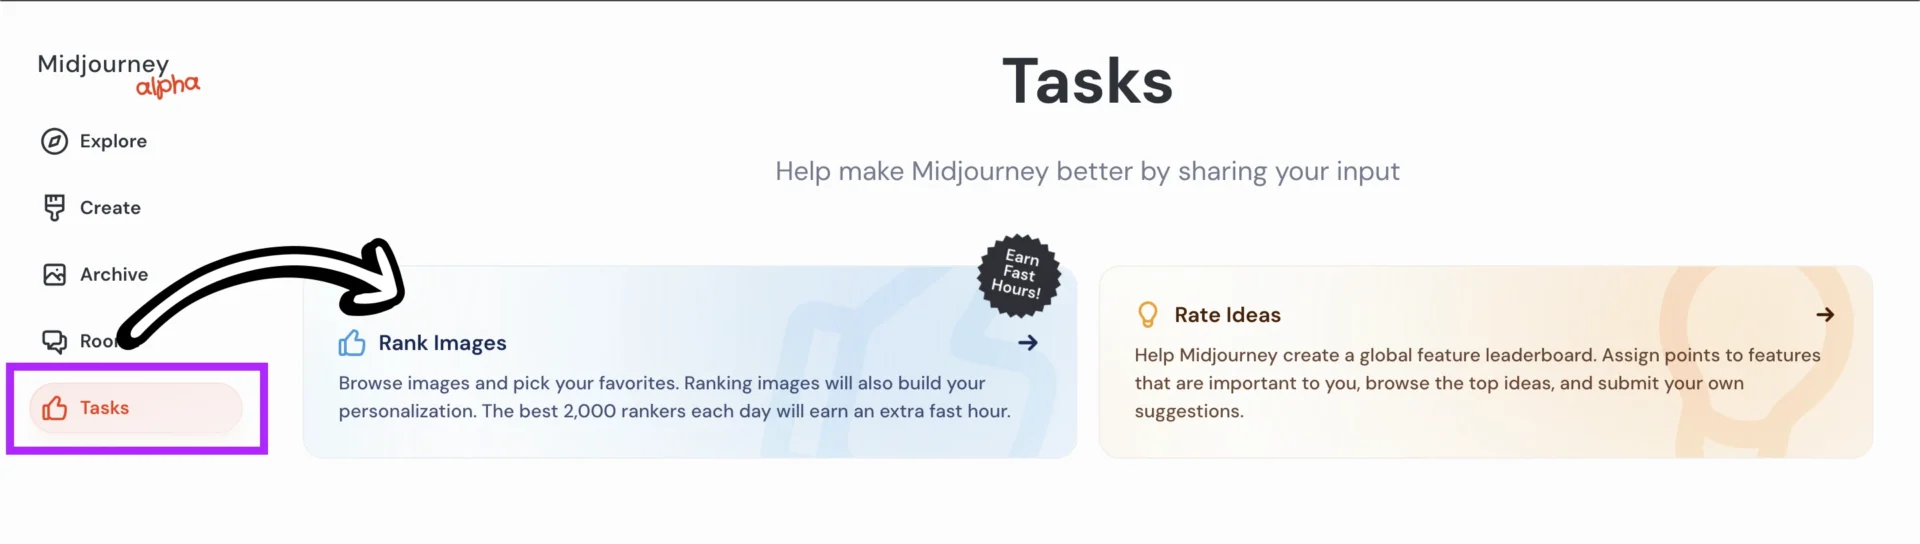 How to Rate Images on Midjourney's Website